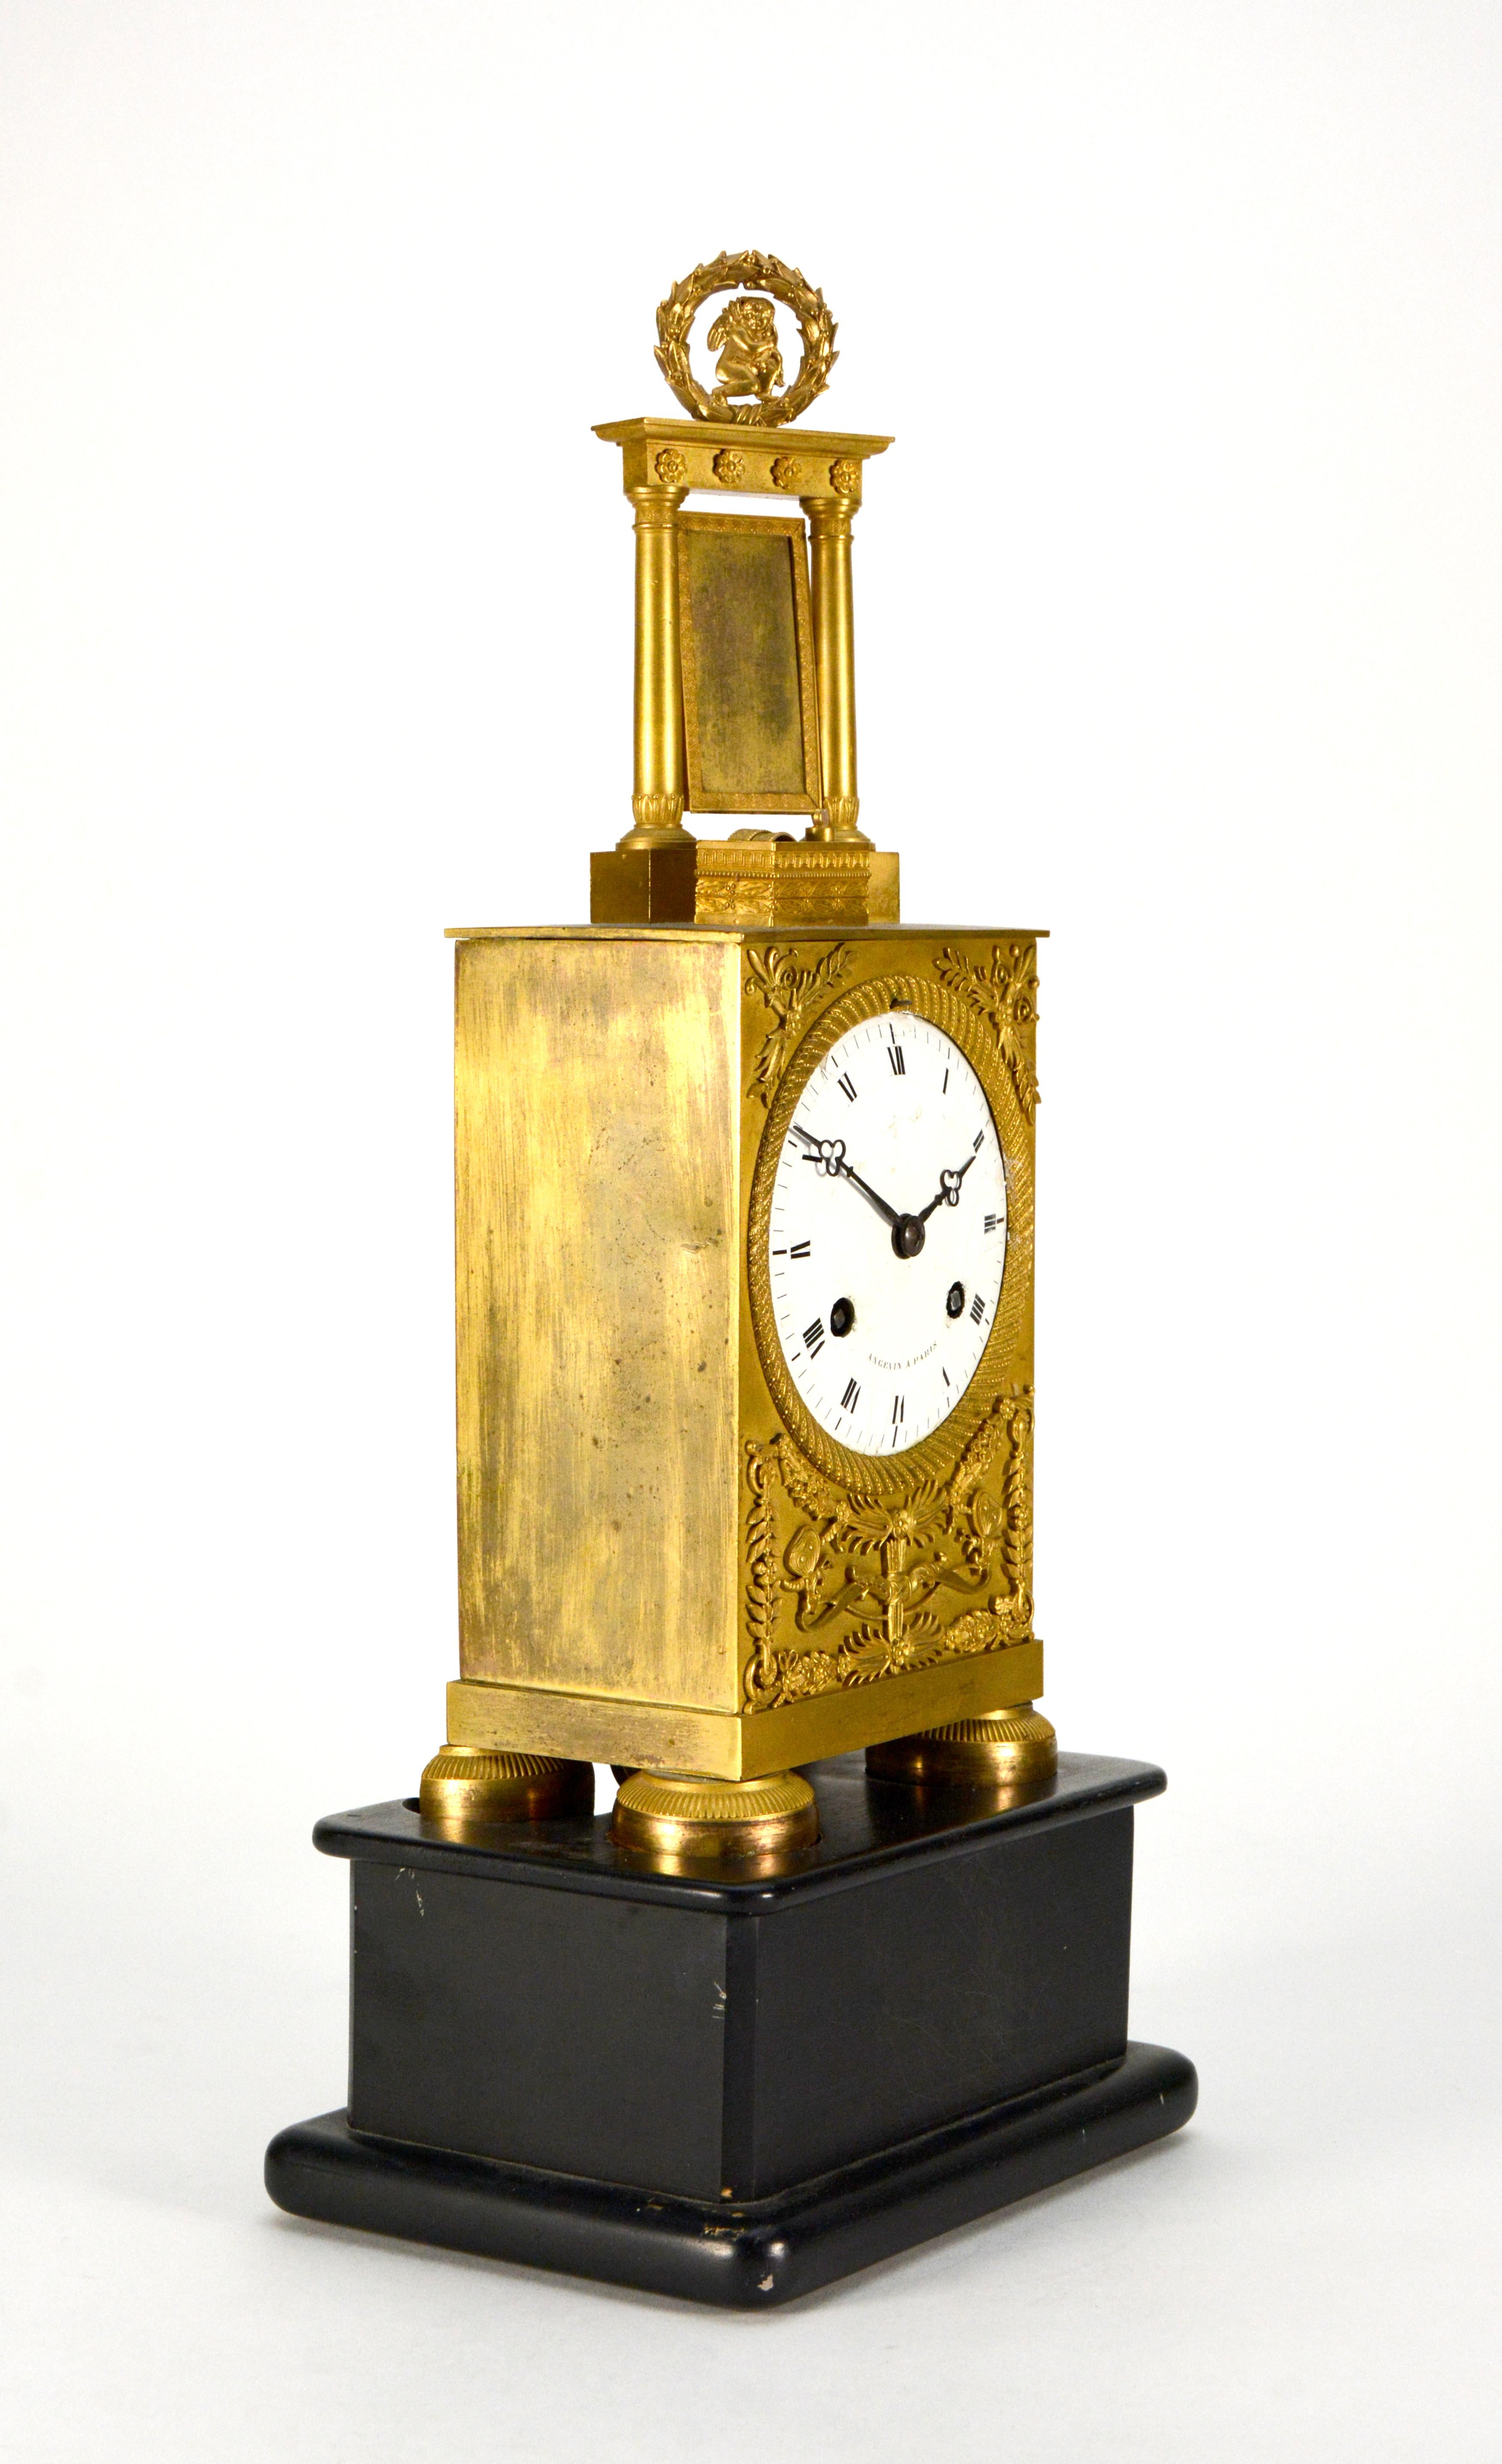 Antique French Ormolu Empire bronze mantel clock by Angevin A Paris

Movement: 8 day wind up mechanism

Function: time with half hour and hour striking

Size: 16